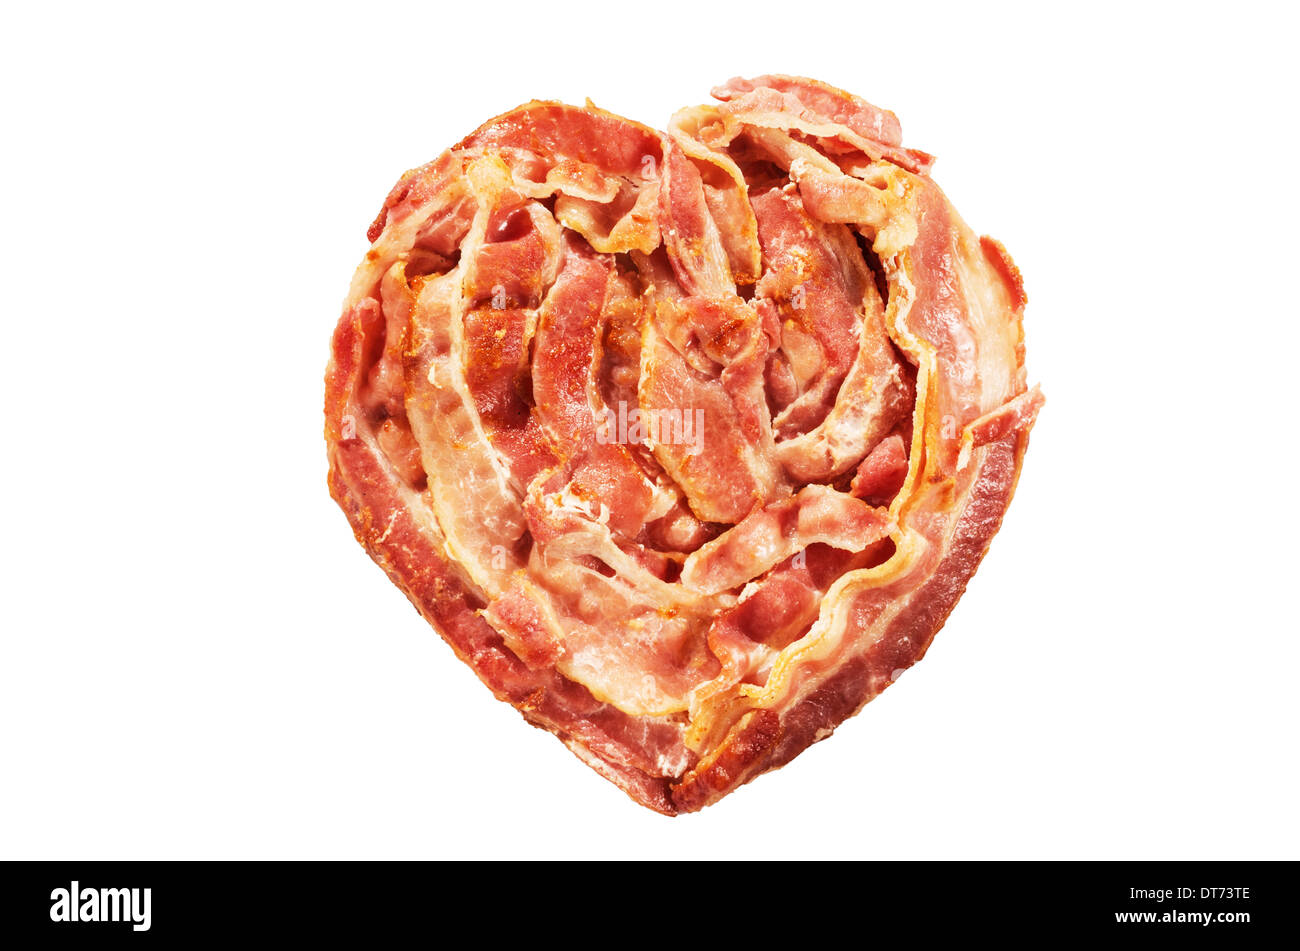 cooked bacon heart shape isolated on white background Stock Photo